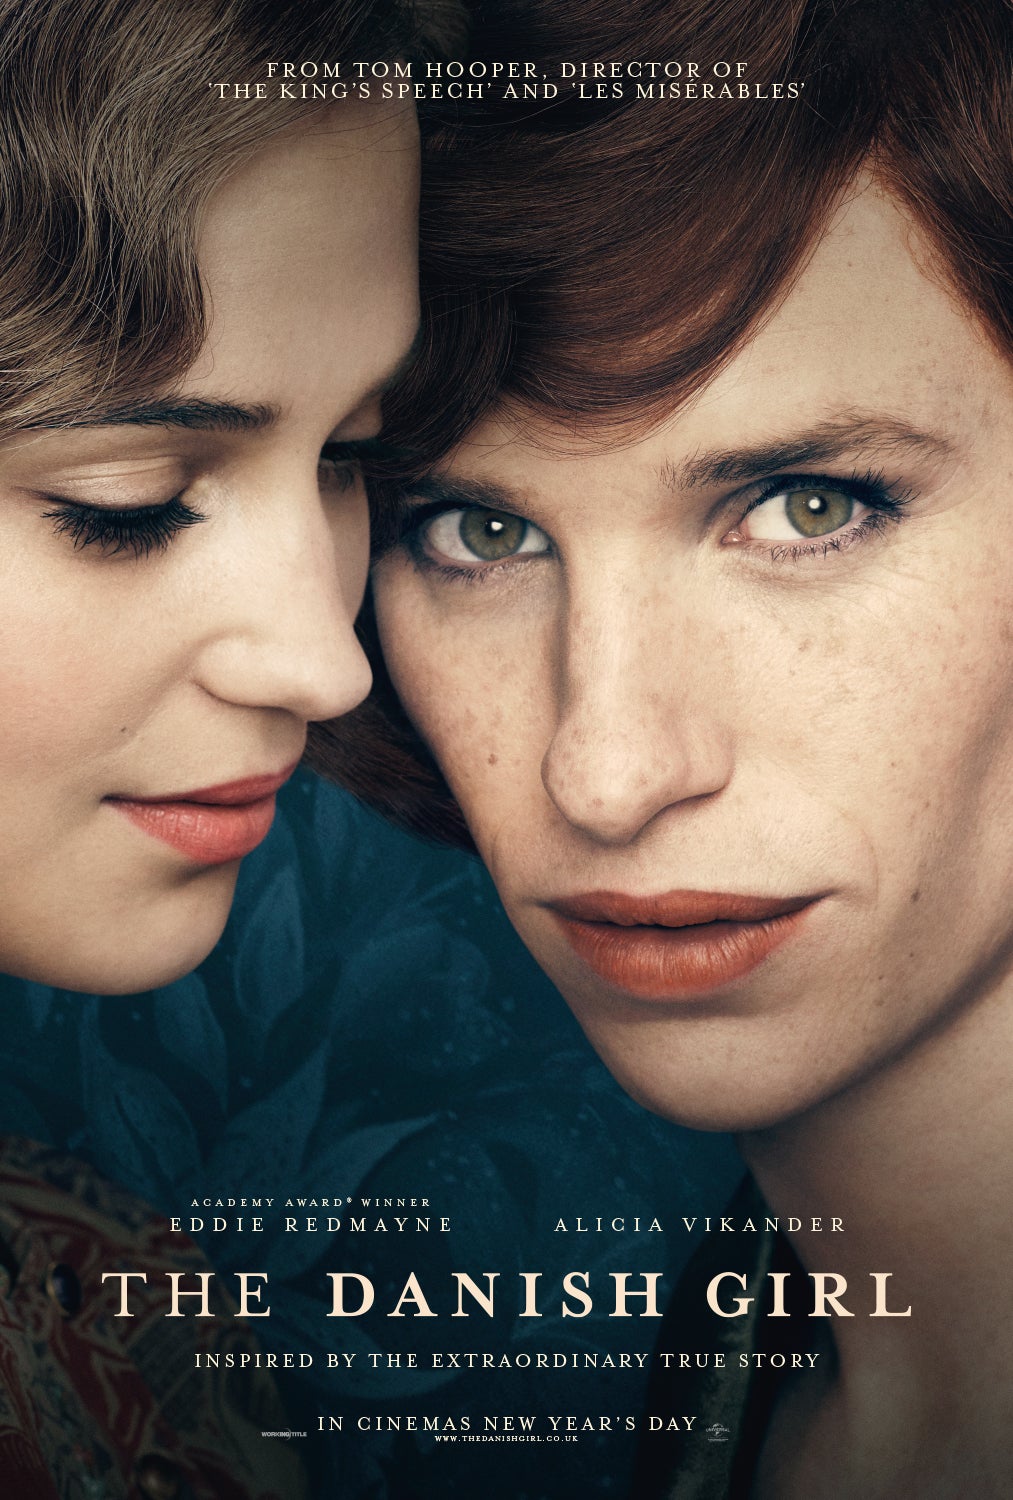 The first promotional poster for The Danish Girl